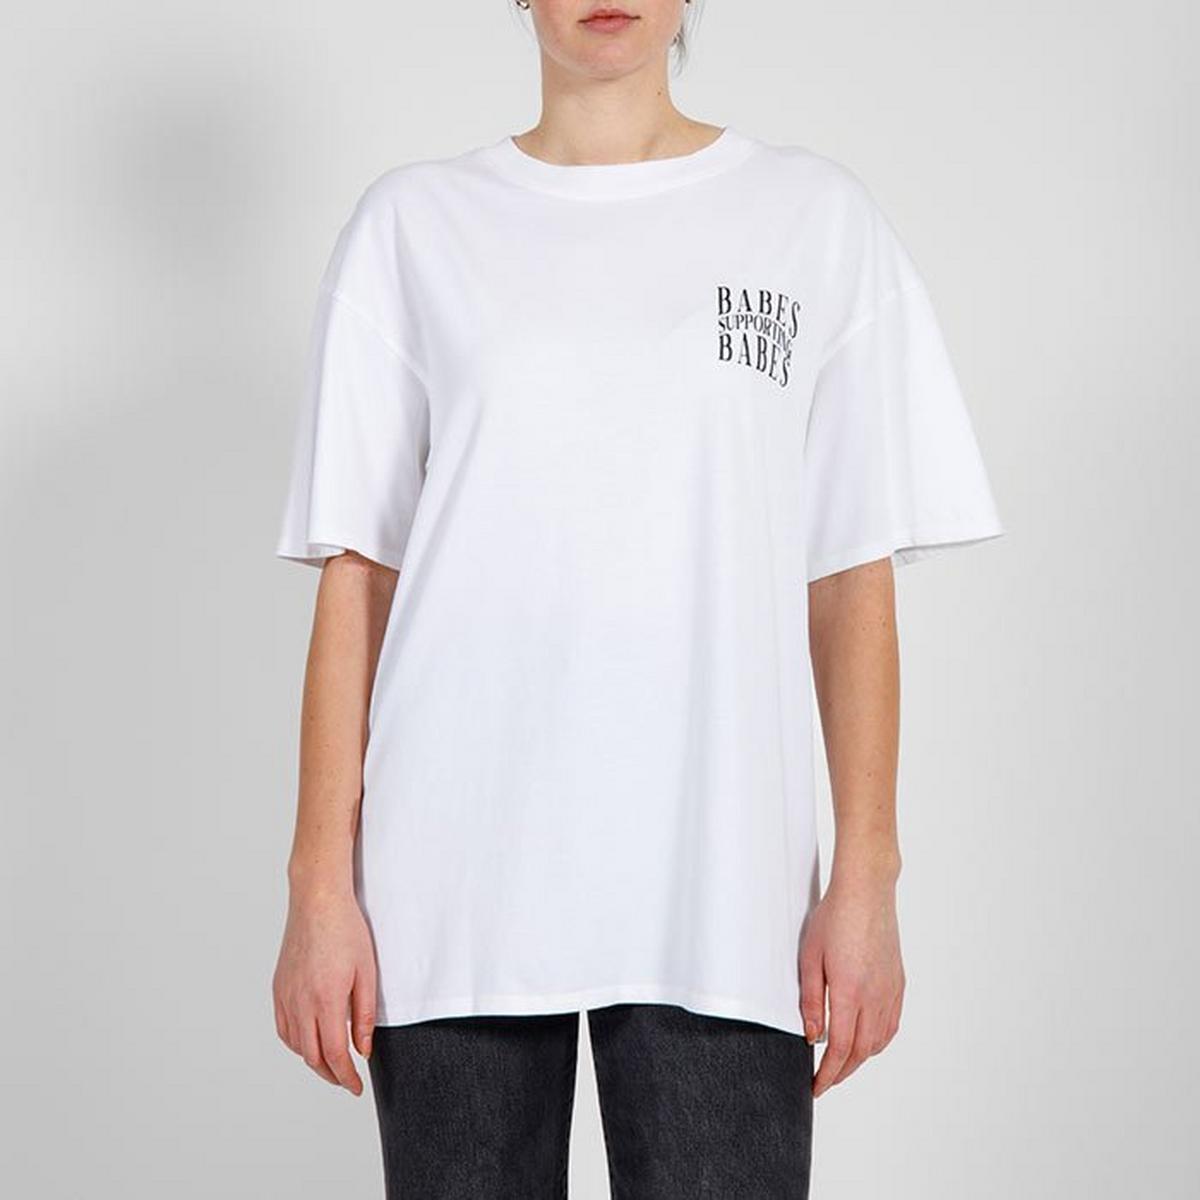 Women's The Babes Supporting Babes Oversized Boxy T-Shirt